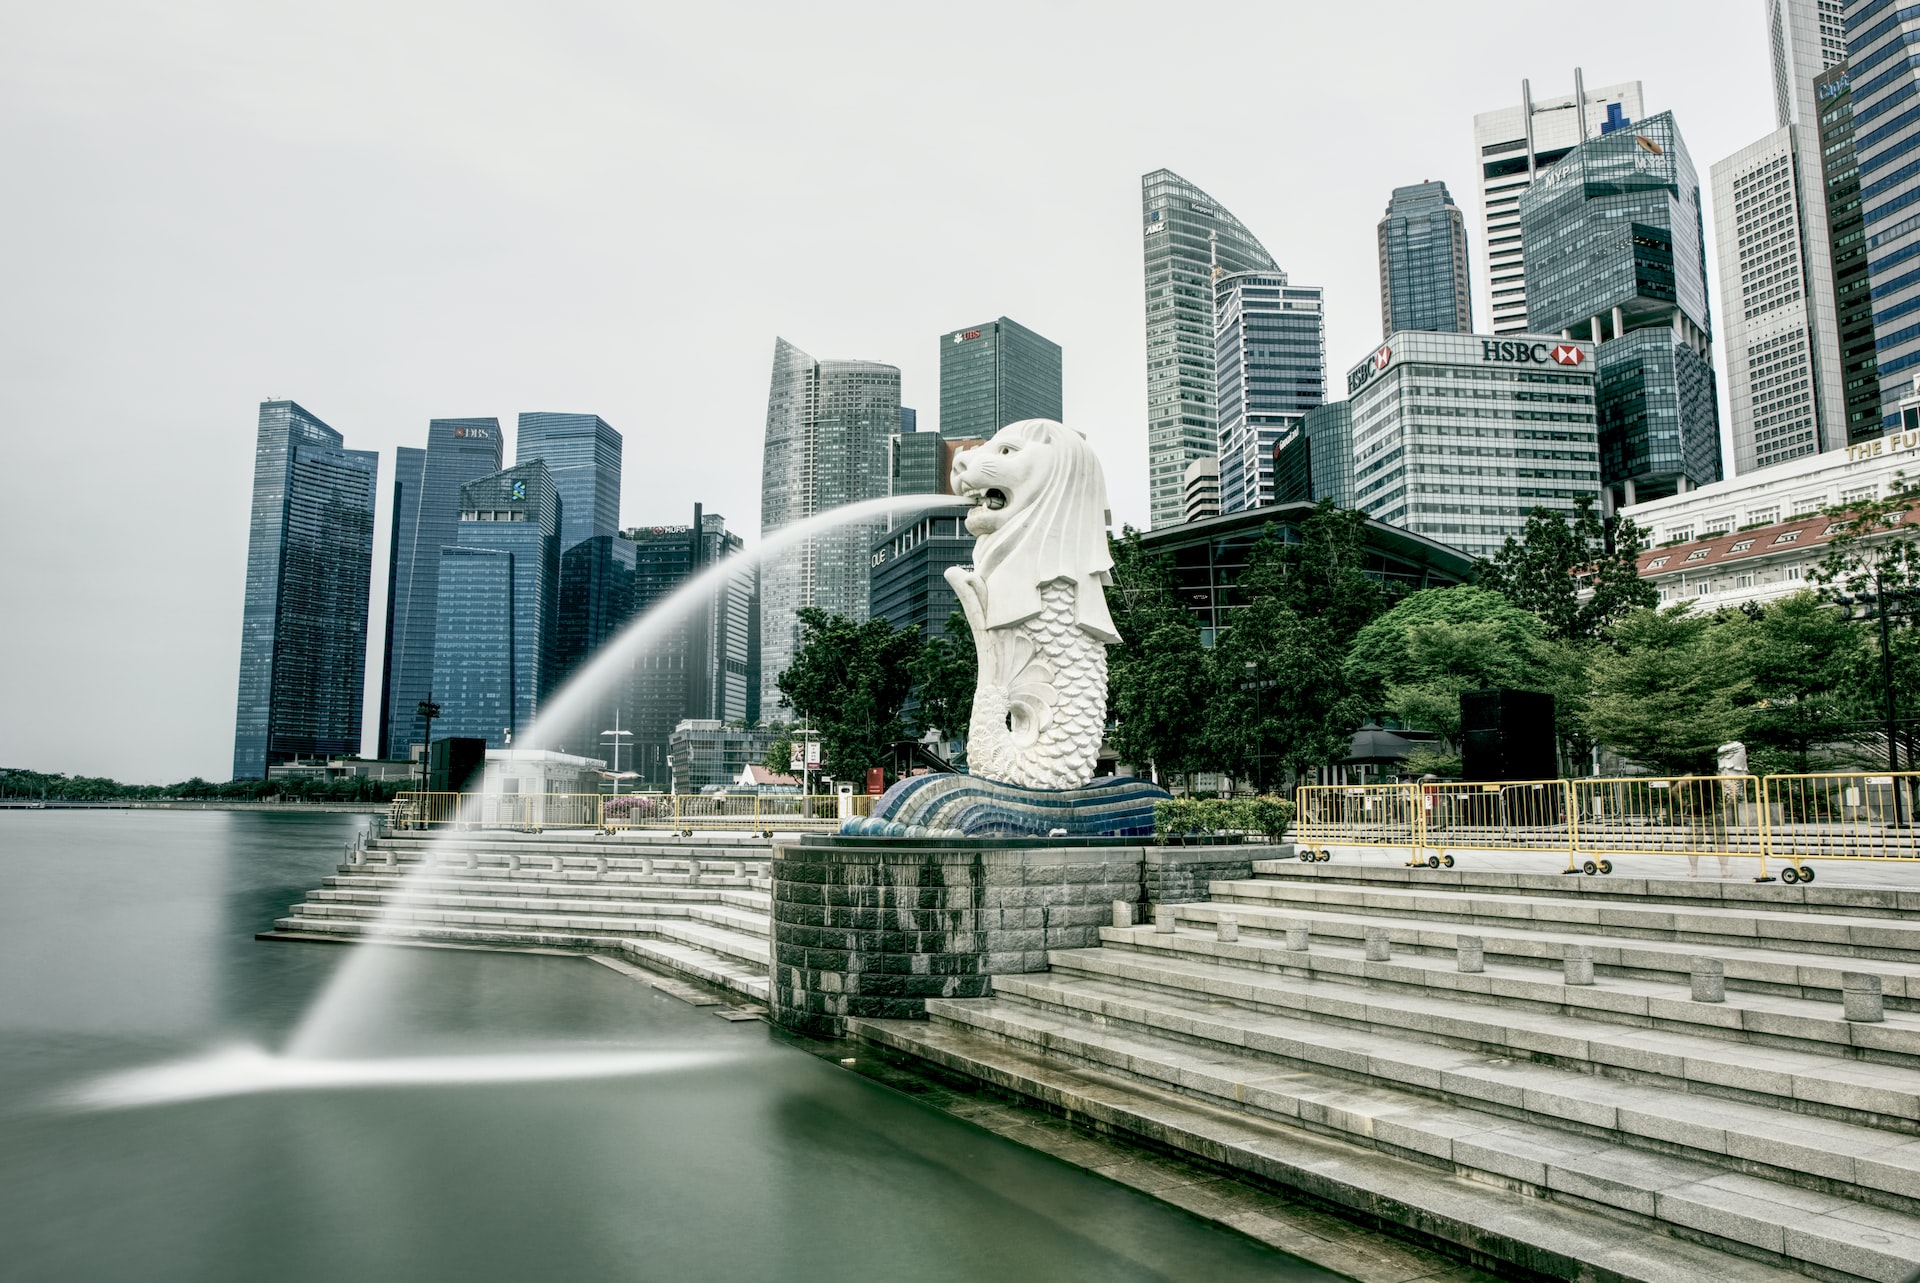 Singapore surges ahead with sustainability events